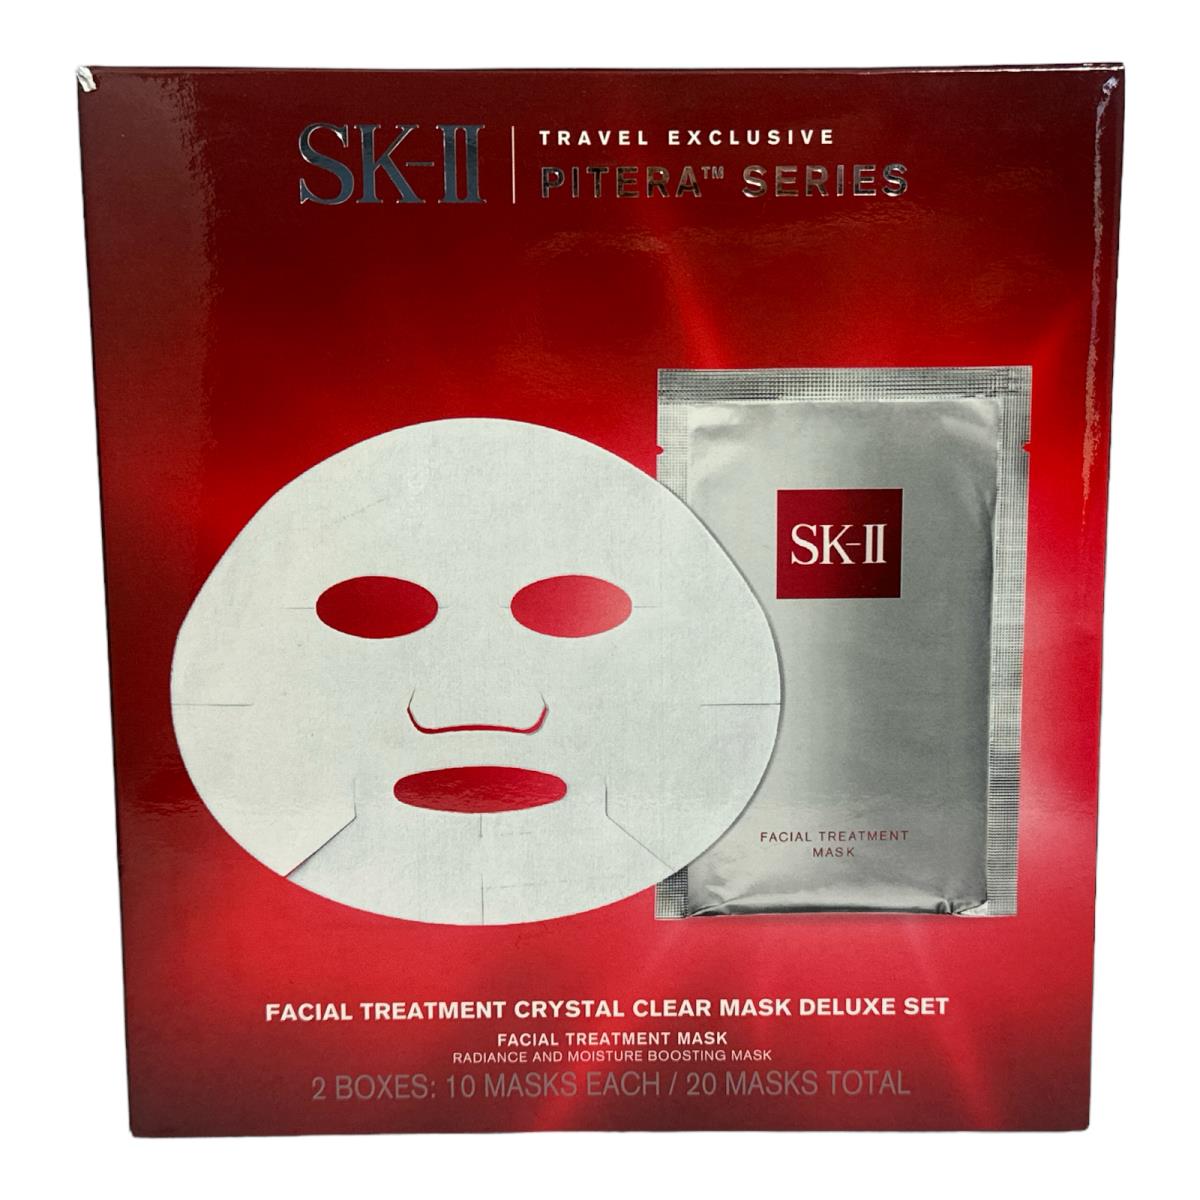 Sk-ii Travel Exclusive Facial Treatment Crystal Clear Mask Deluxe Set 20 Masks